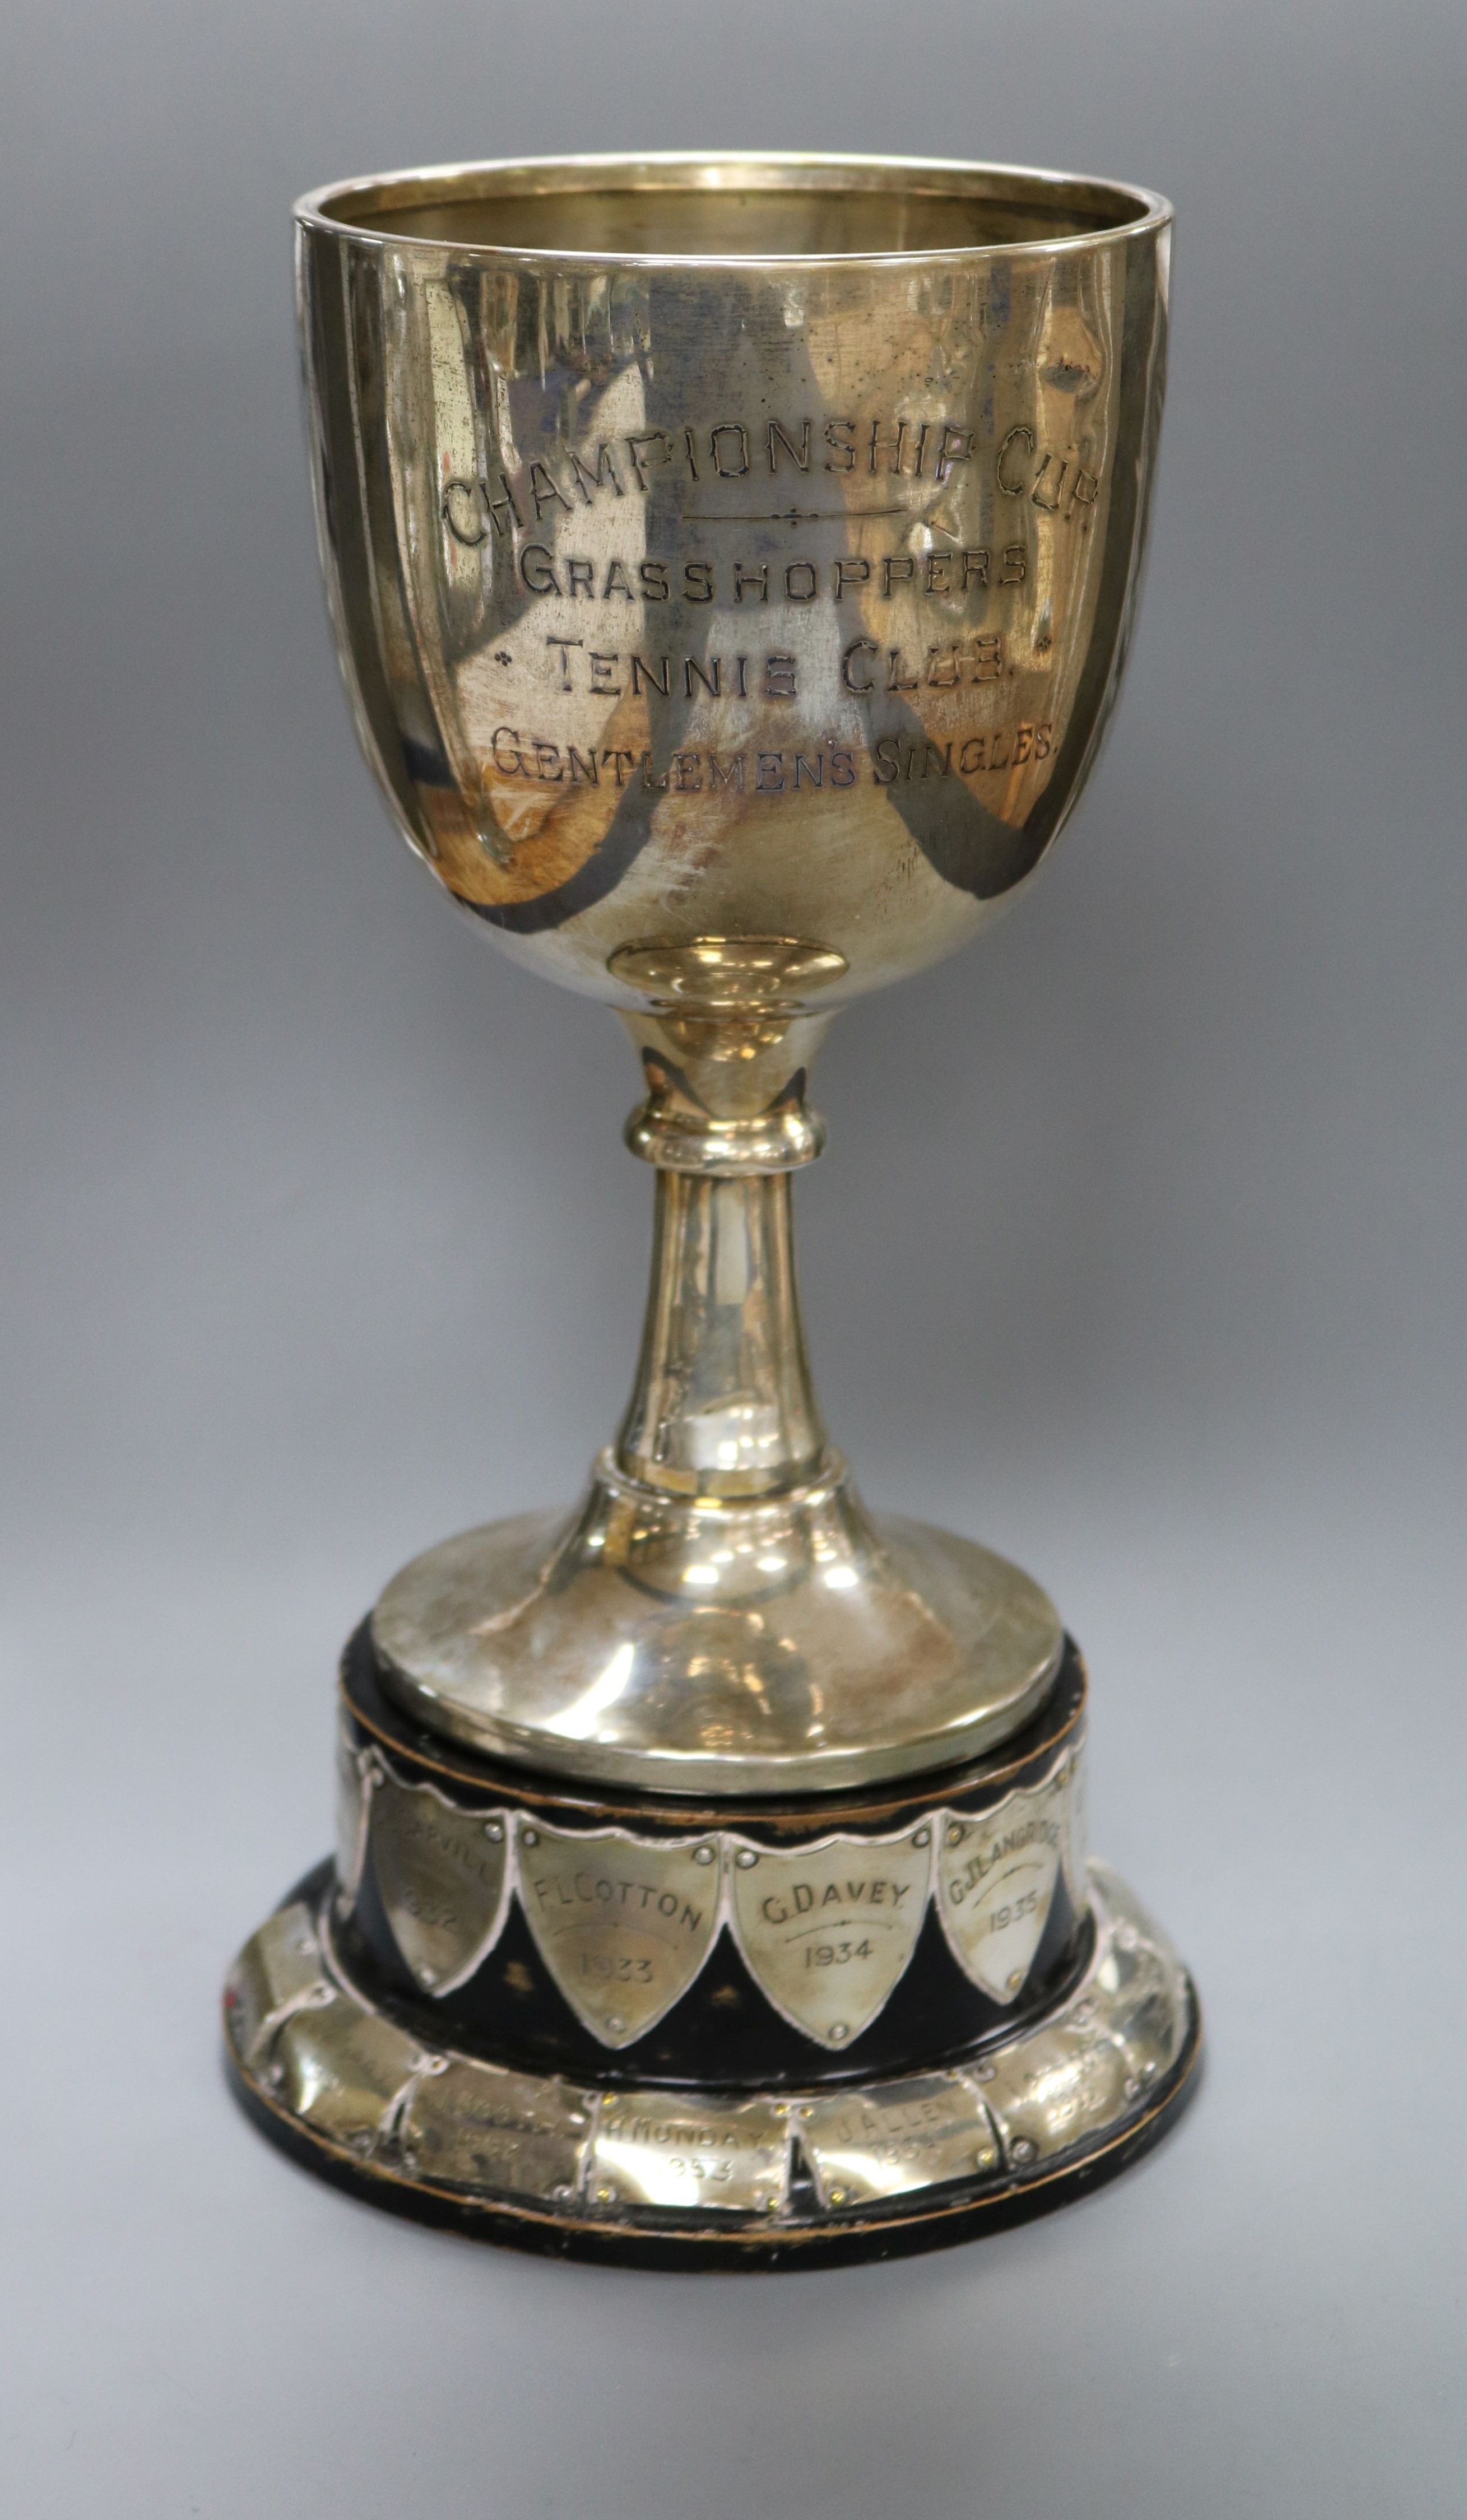 A George V silver presentation tennis trophy cup, S. Blanckensee & Sons Ltd, Chester, 1932, on